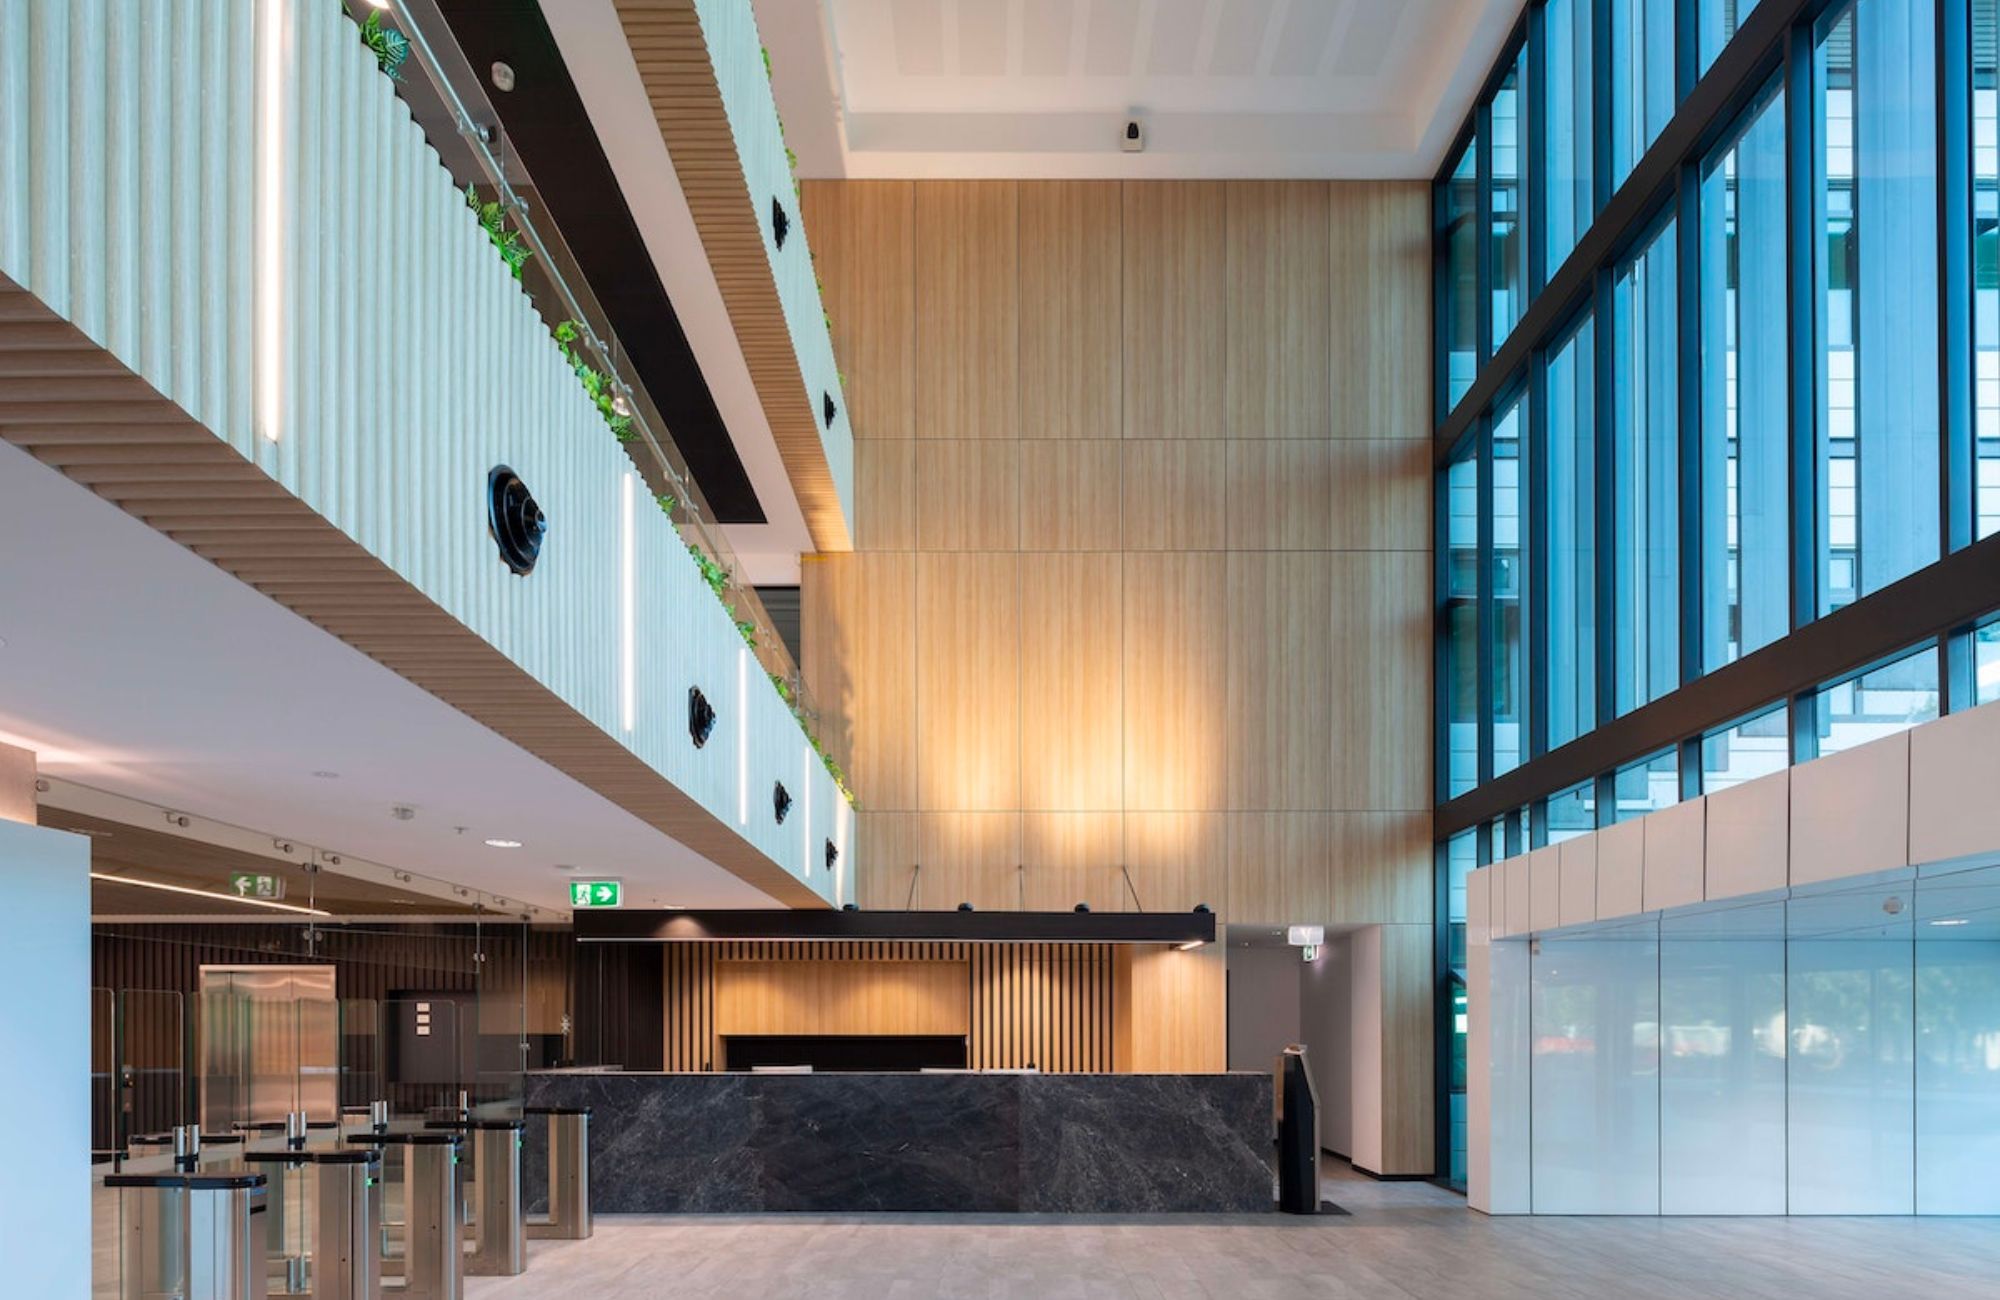 Commonwealth Department Fit-Out by AMC Architecture showing interior of lobby